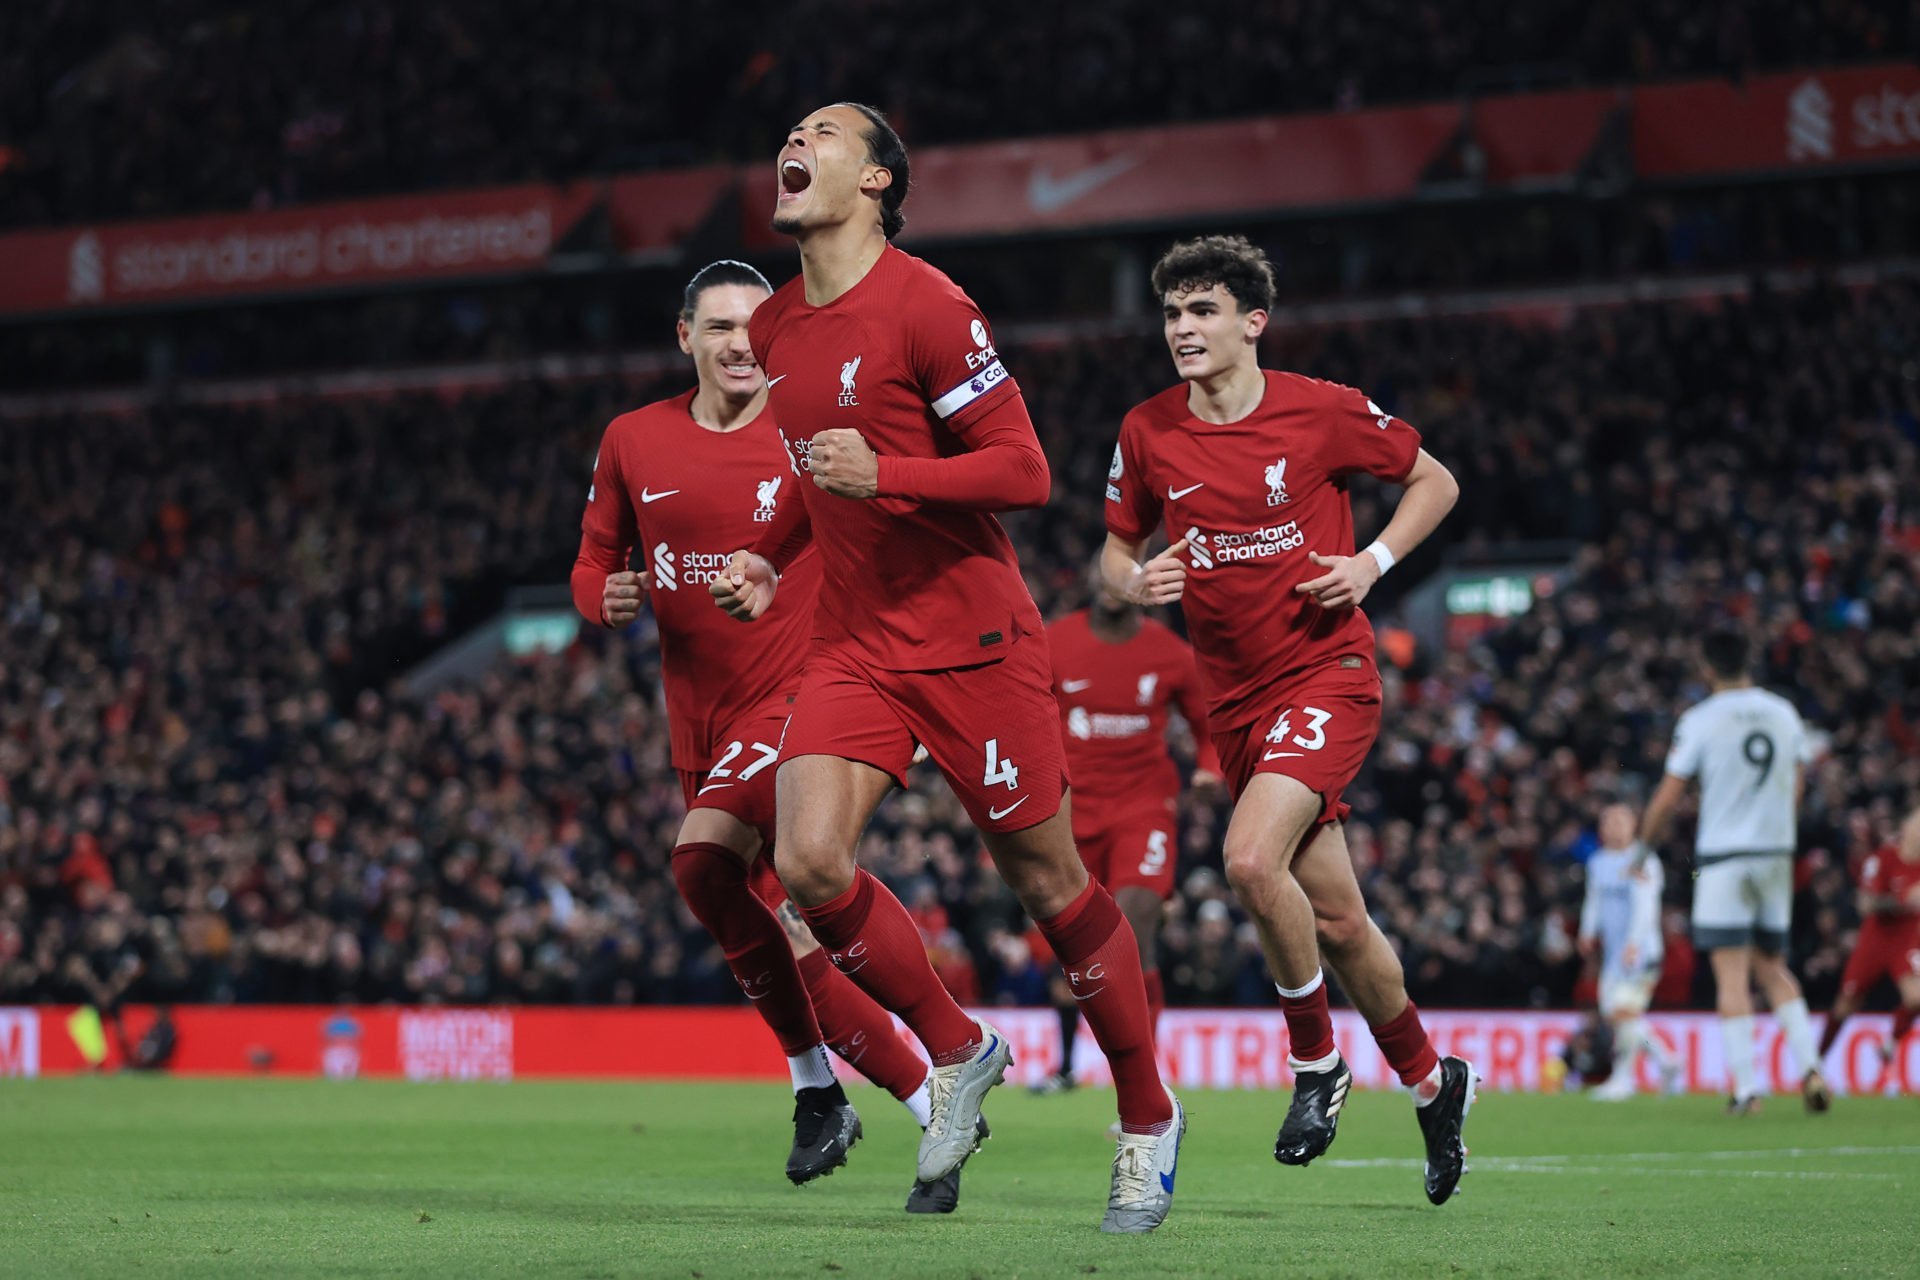 Liverpool defeat Wolves to move into Premier League top six